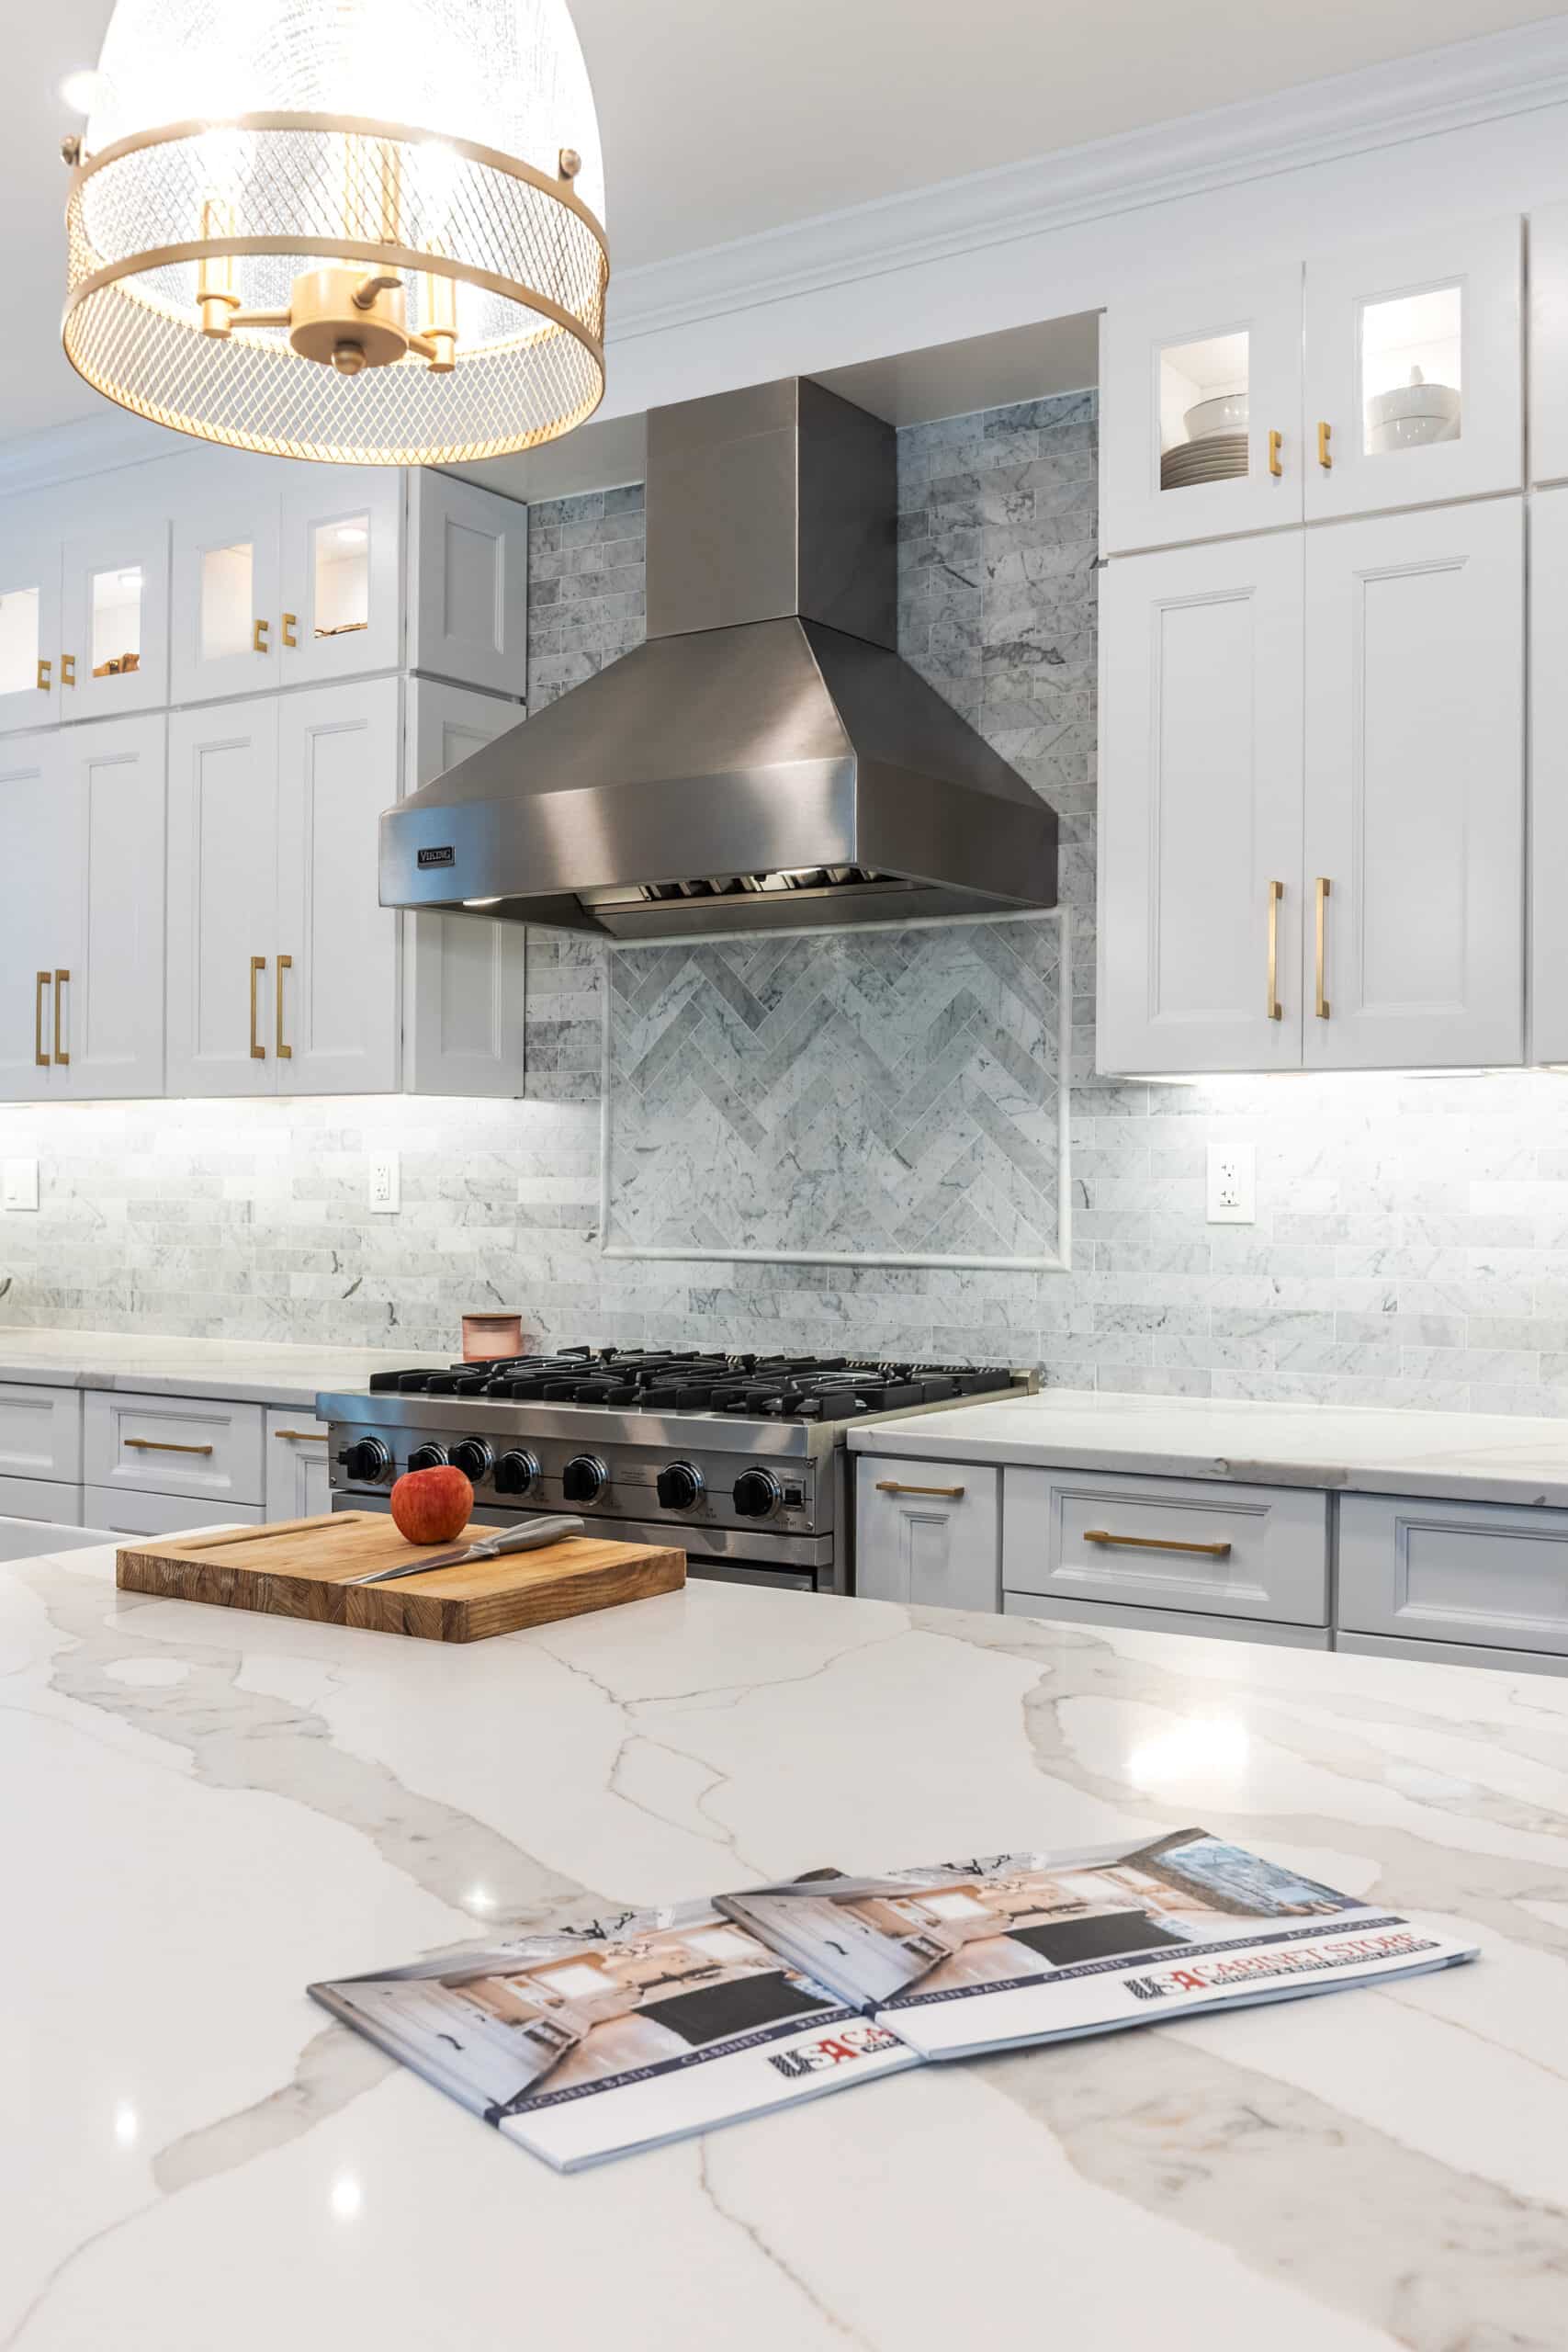 A contemporary kitchen featuring elegant marble countertops and a stylish stove